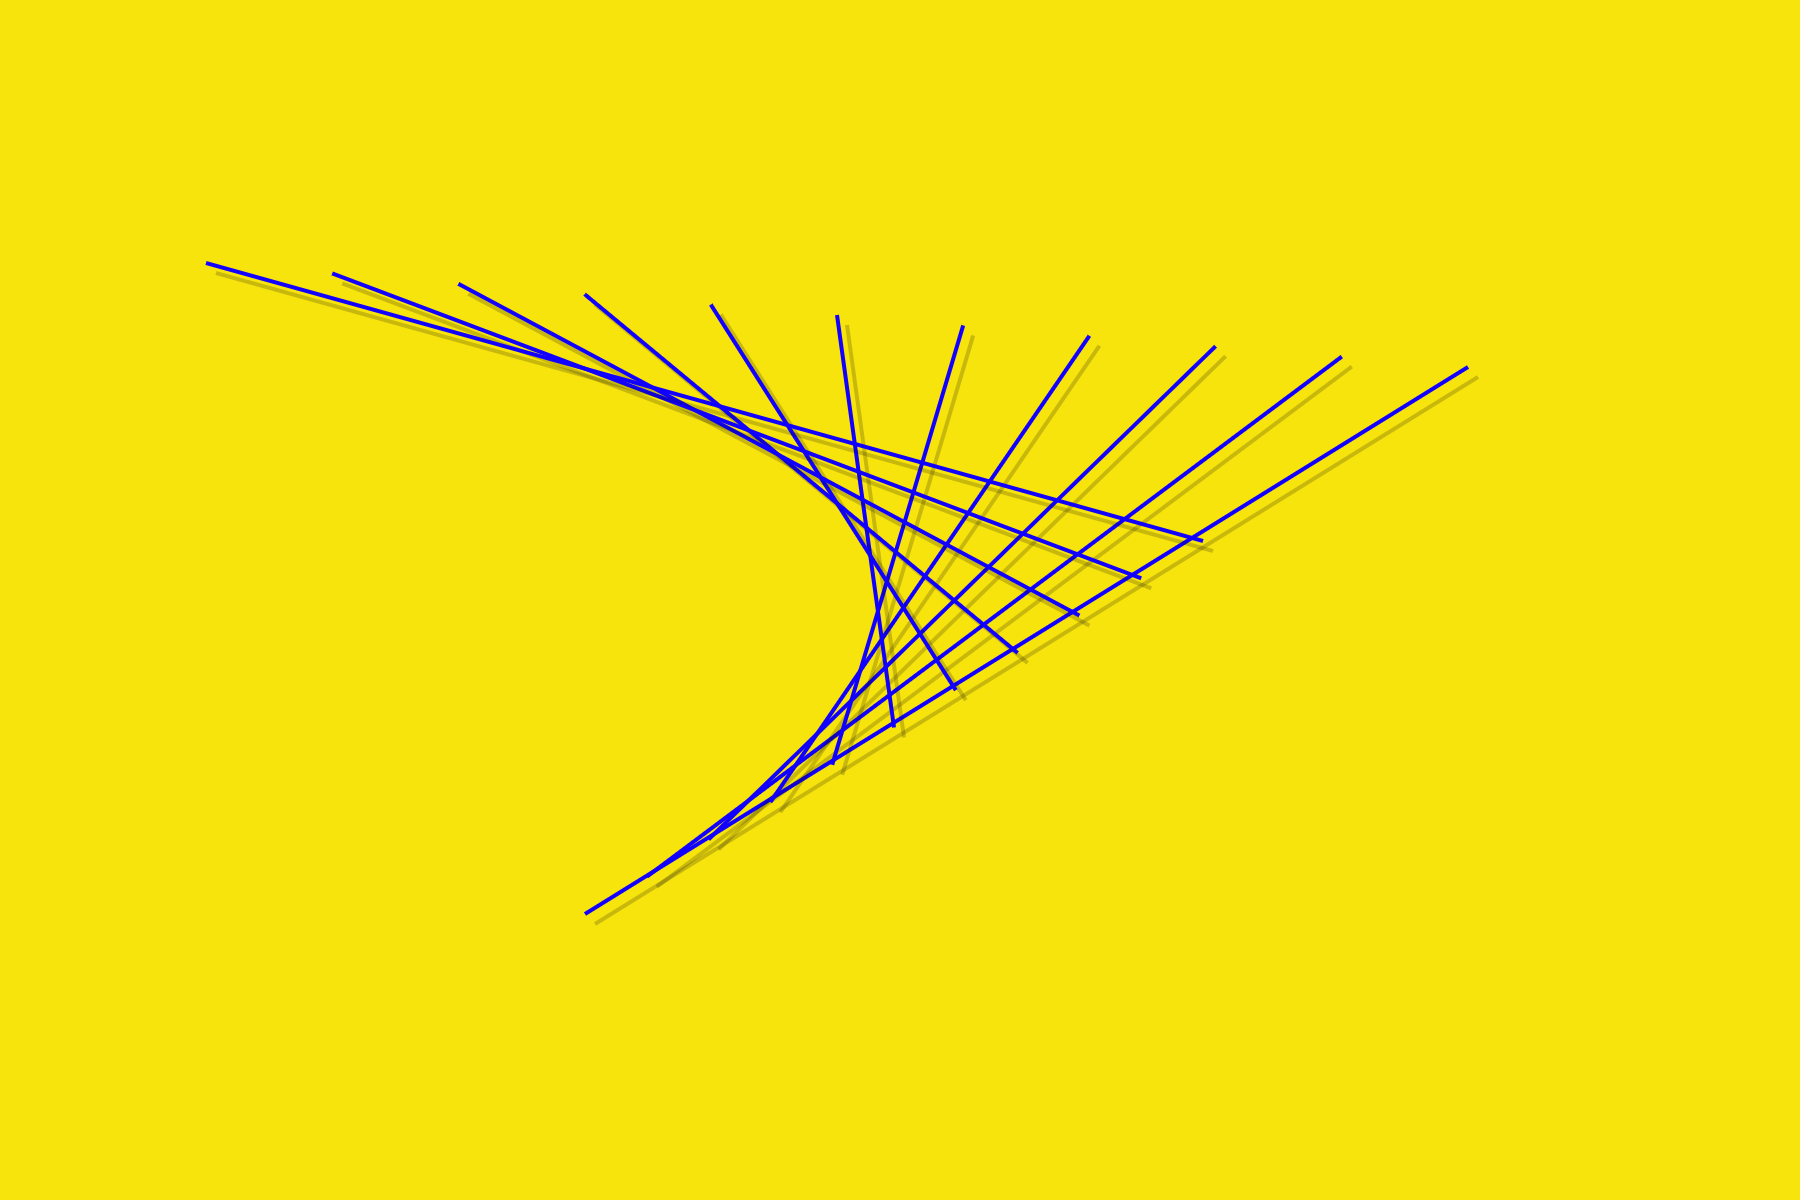 lines 17, and image with 11 lines